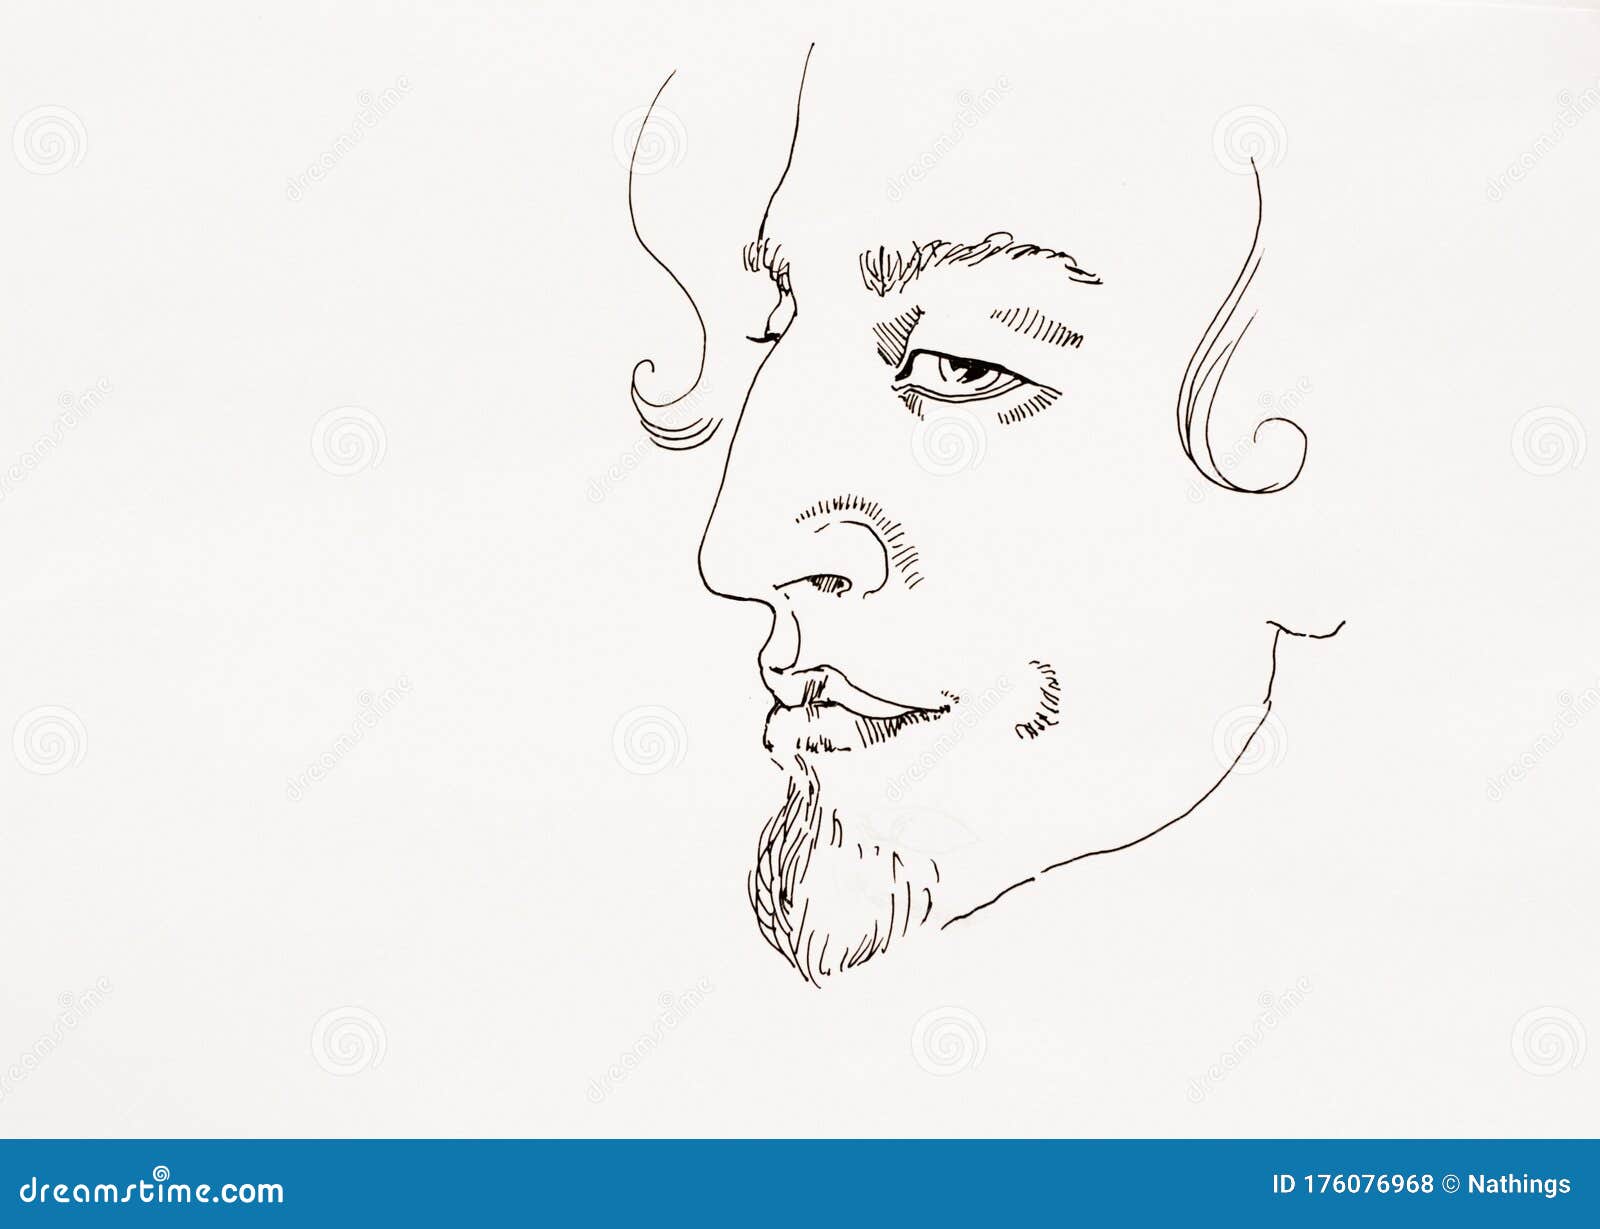 Head Drawing Fundamentals Made Simple | Udemy